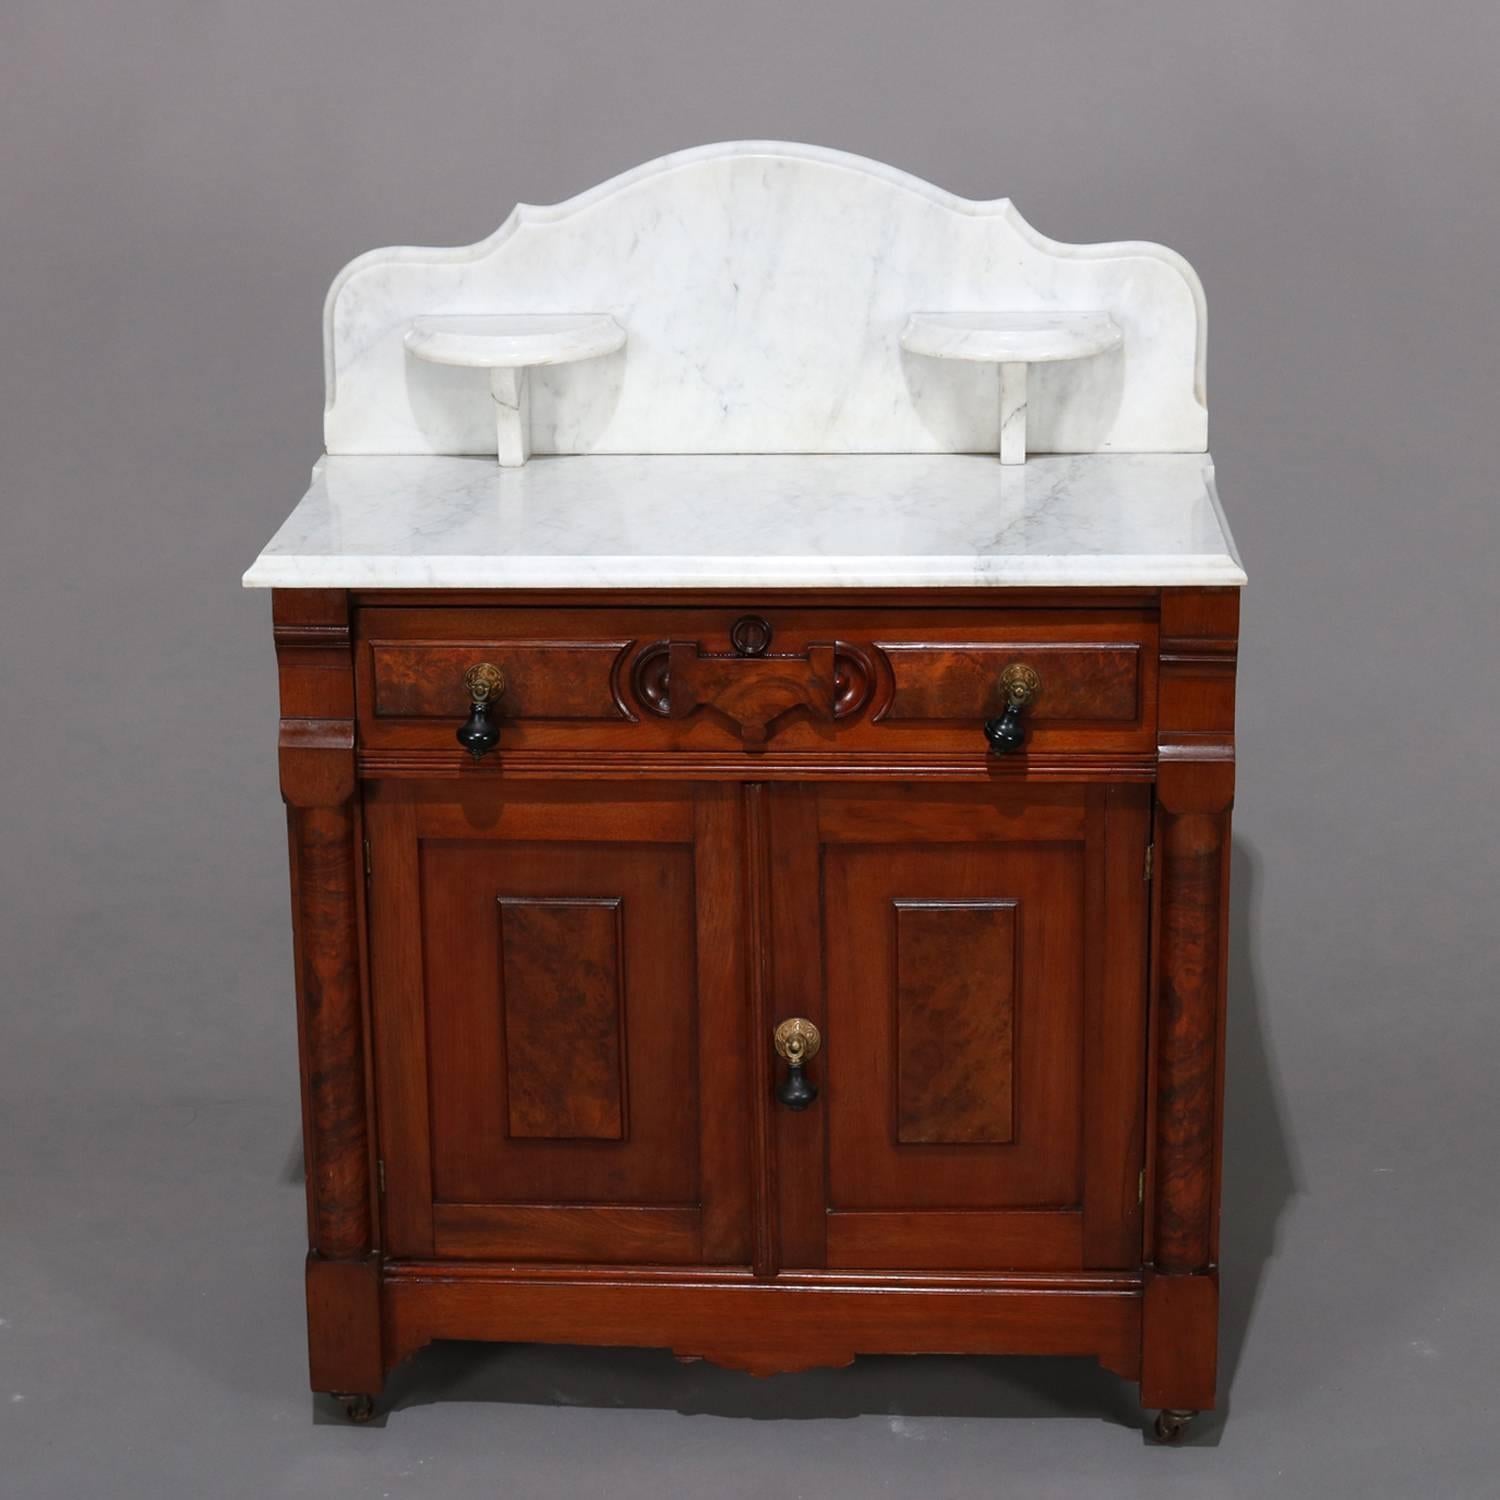 Antique Renaissance Revival carved walnut washstand features scalloped and bevelled marble backsplash having candle stands over marble top cabinet with burl having frieze drawer over lower double door cabinet, 1870.

Measures: 39.5